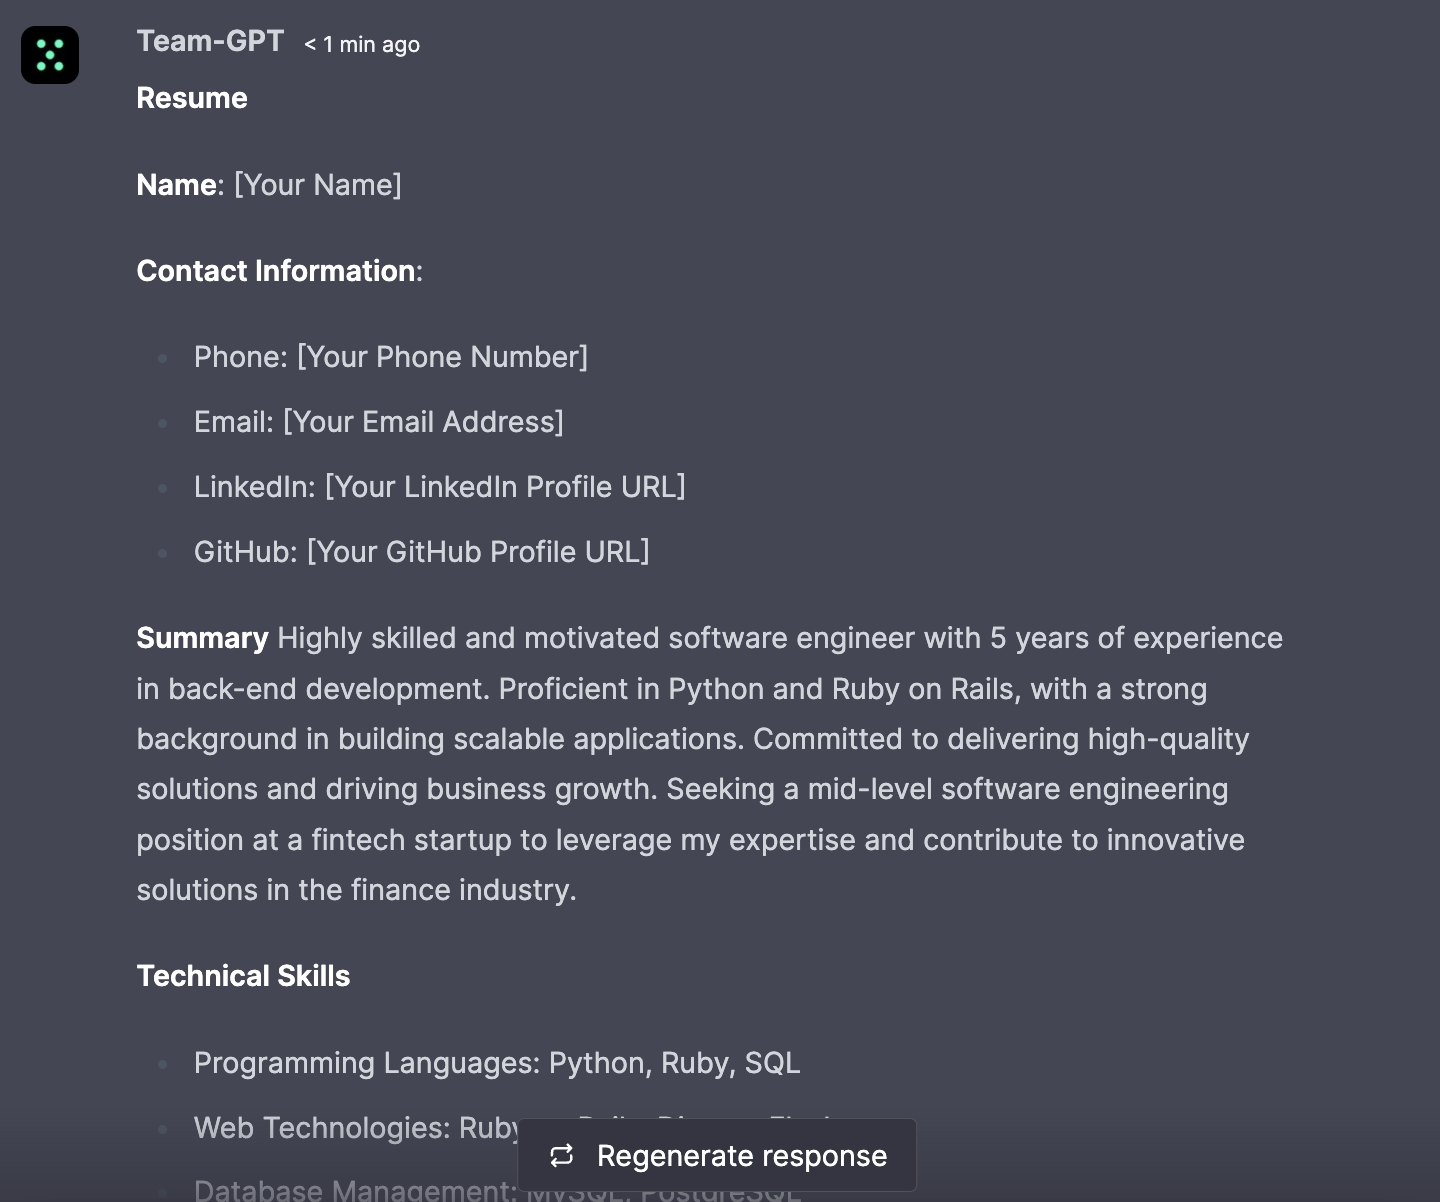 build a resume using chatgpt